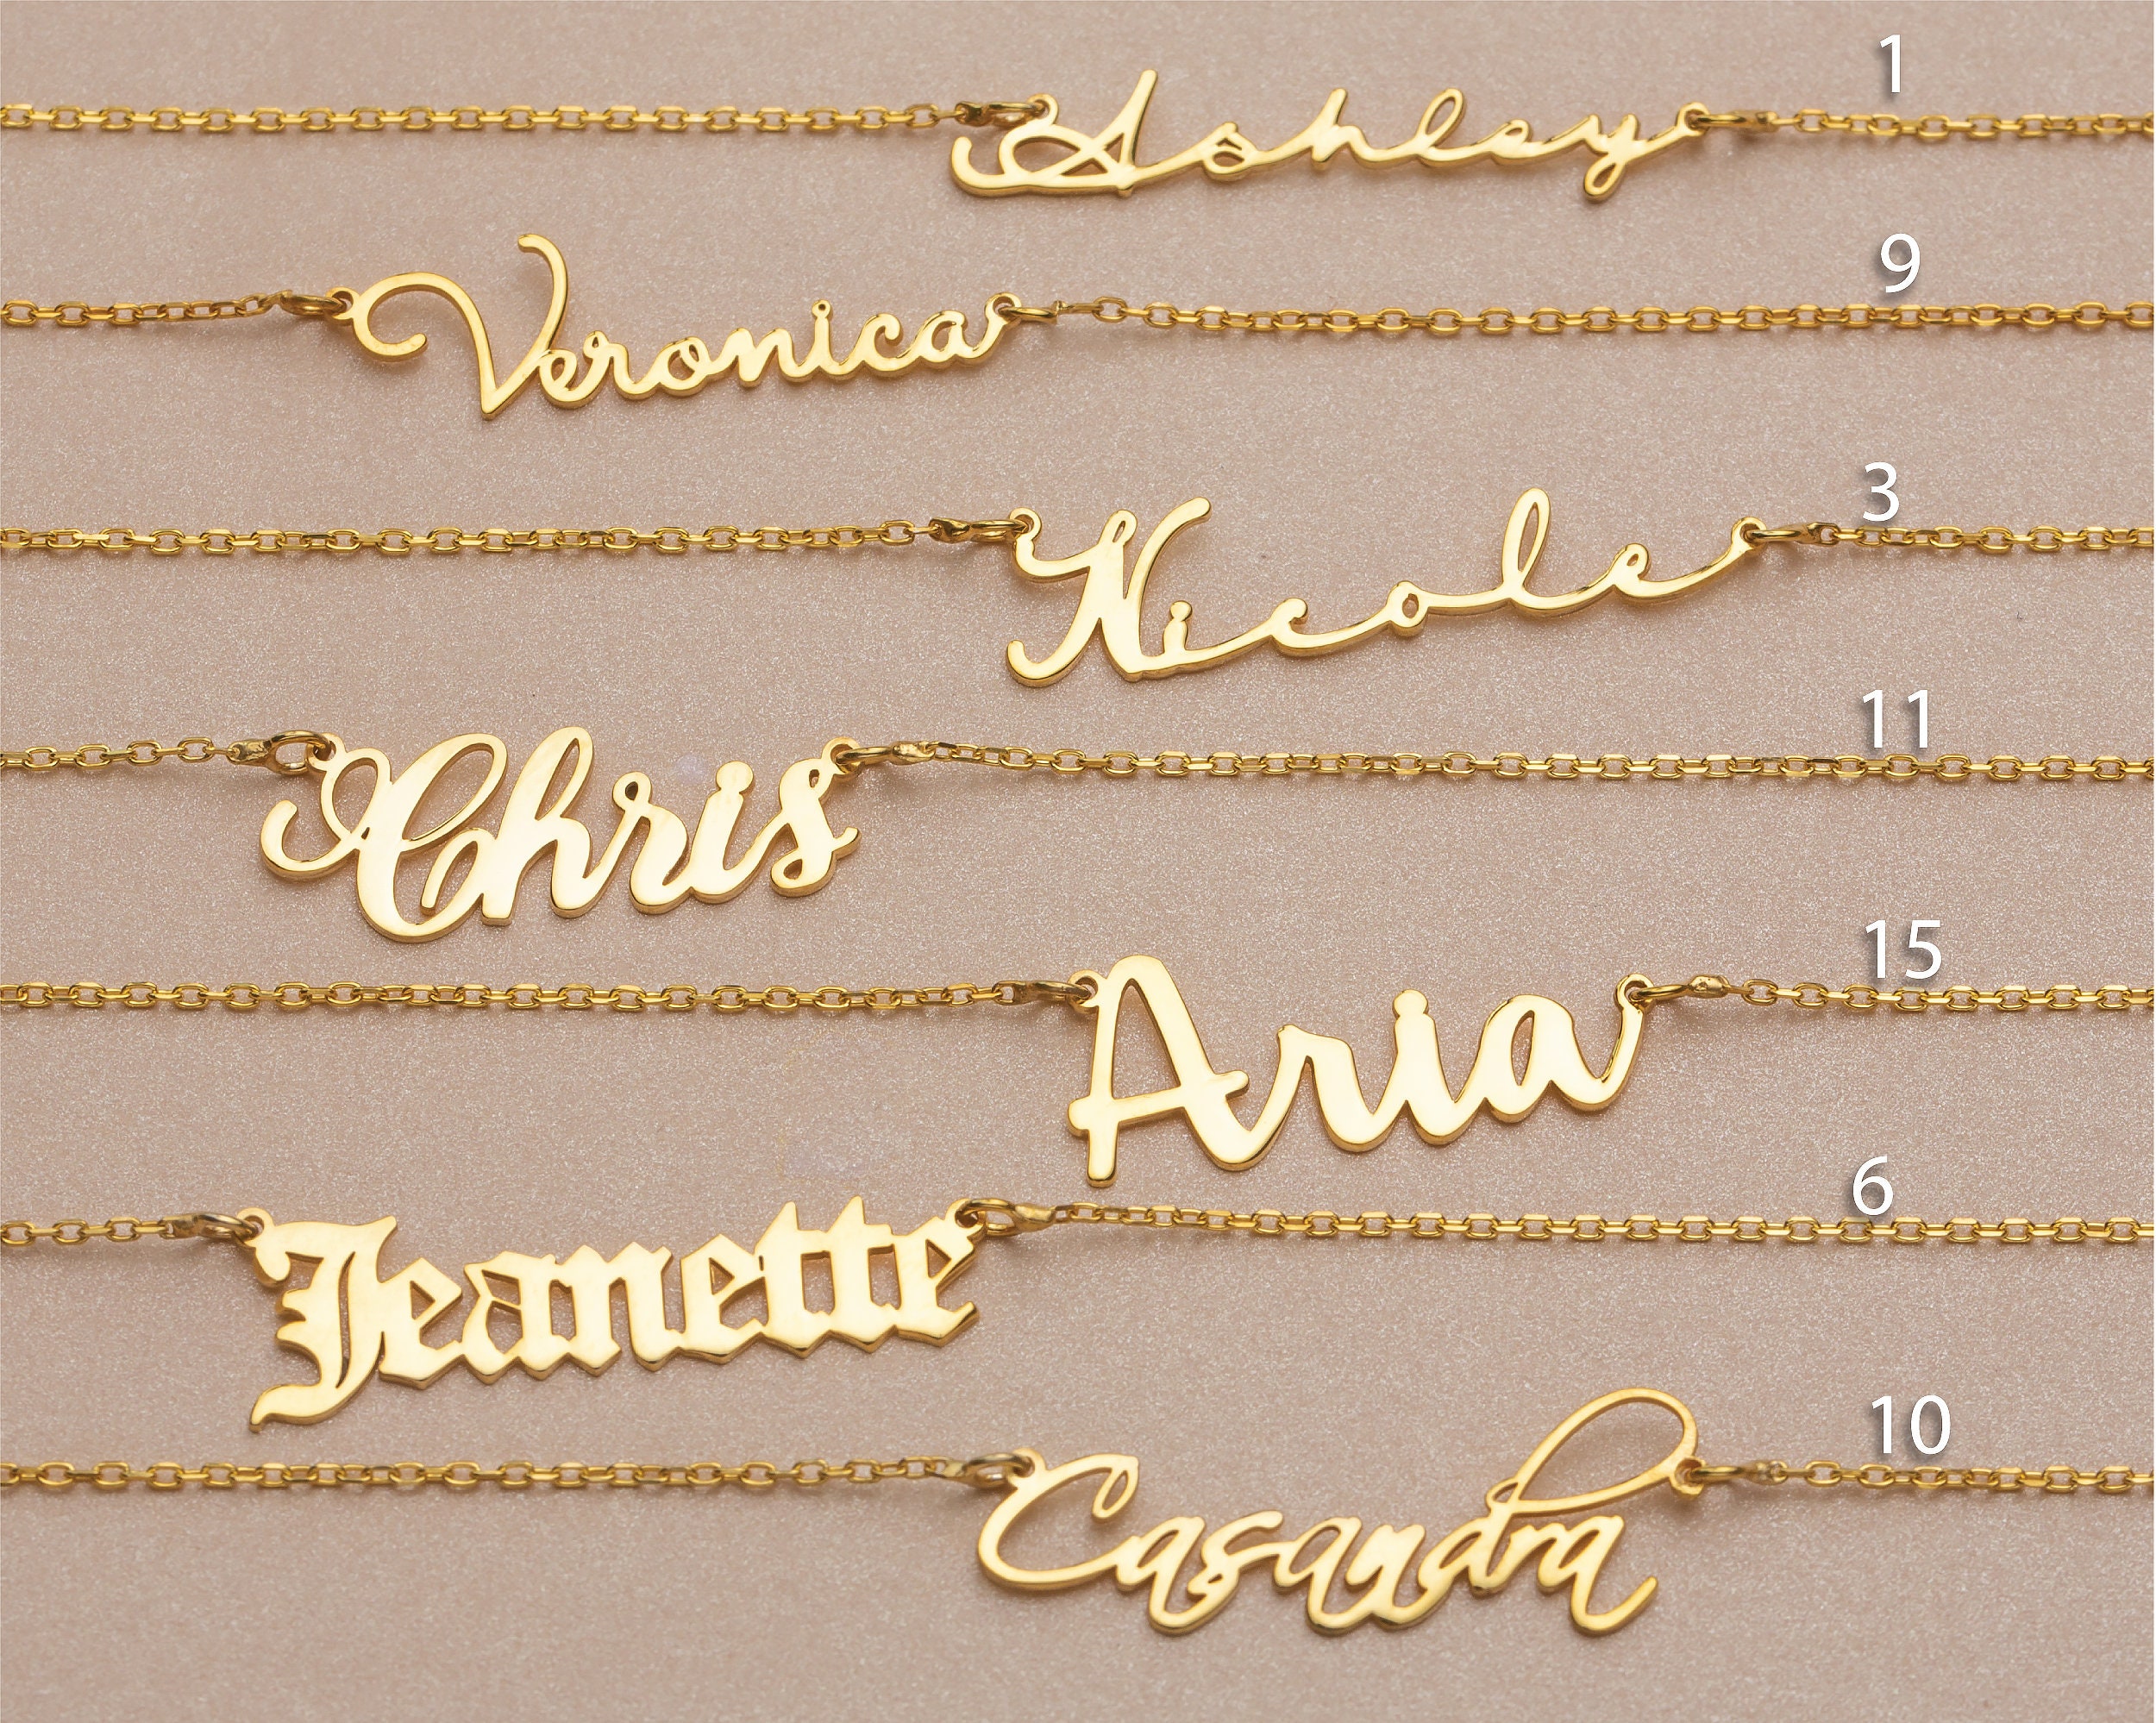 Gold Name Necklace - Mon Petit Name Necklace - 14K Solid Gold - Gift for Birthday - Push Present - Custom Gold Necklace - Valentine's Day Gift Ideas